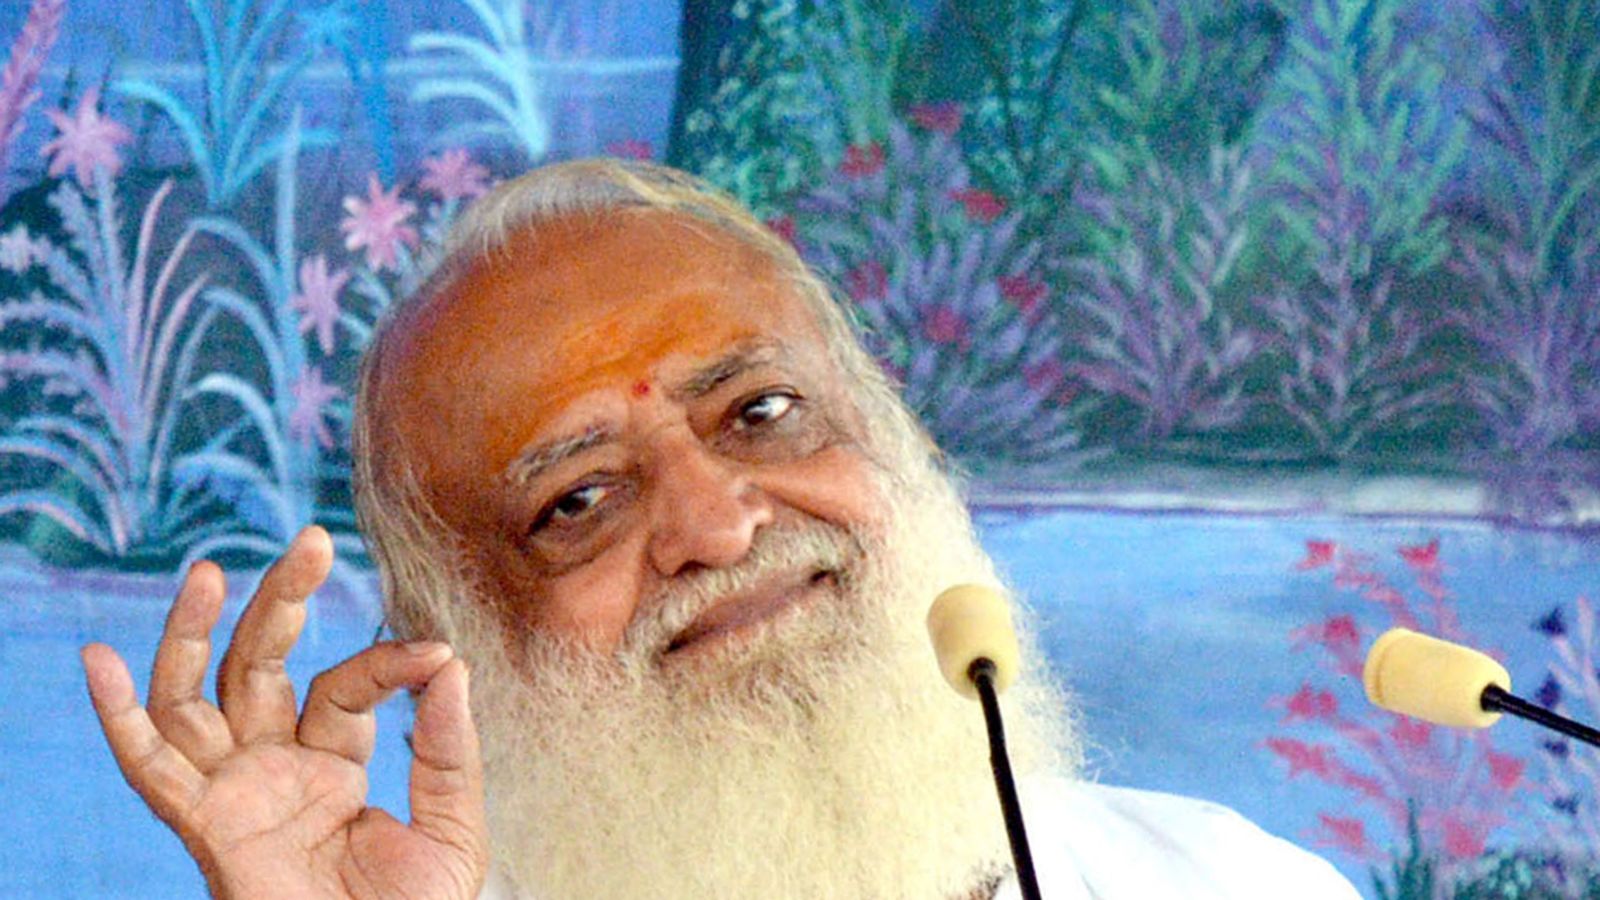 Self-styled 'godman' with millions of followers jailed for life for raping minor